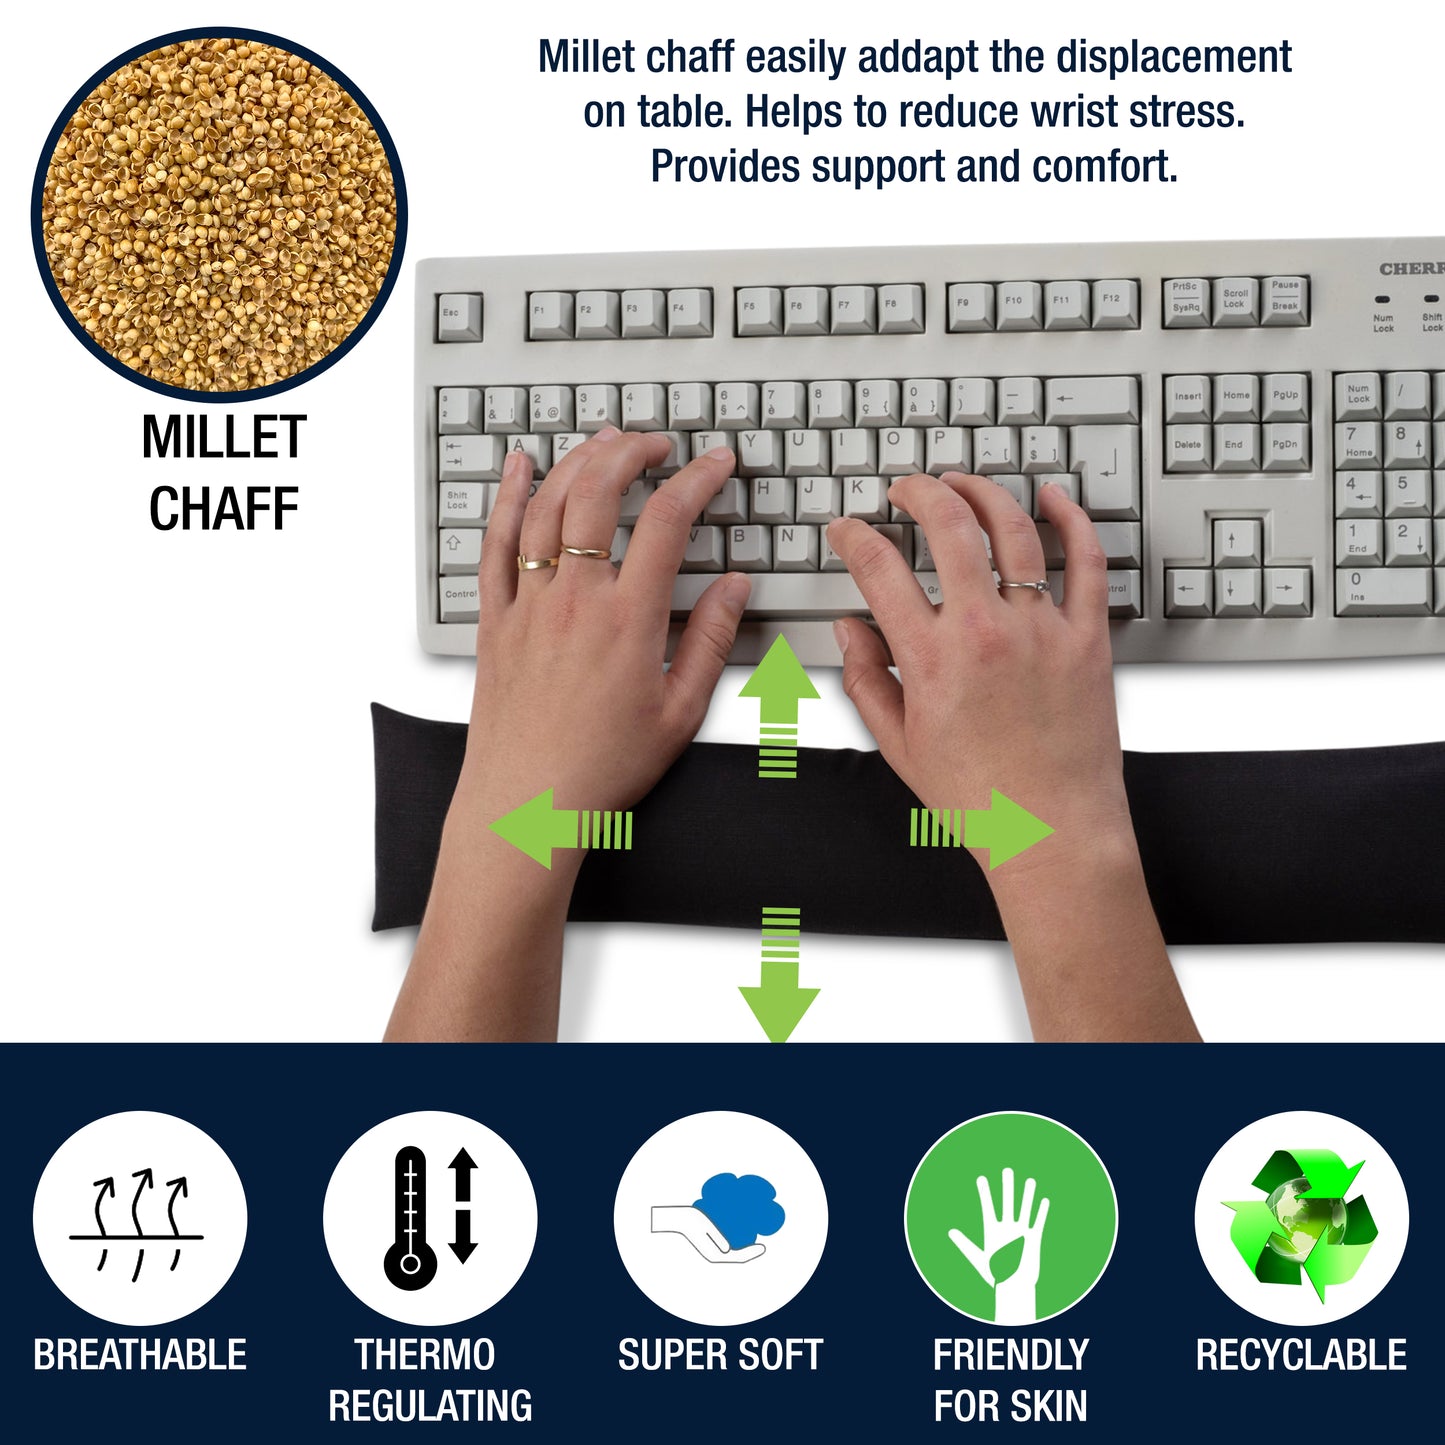 SANTERGO Keyboard Pad (1.0-CLASSIC) Wrist Rest Ecological Ergonomic with Organic Millet Chaff to Relieve the Wrists, Cushion Support, Easy Typing, Office, Computer, Pillow Fabric: TENCEL®